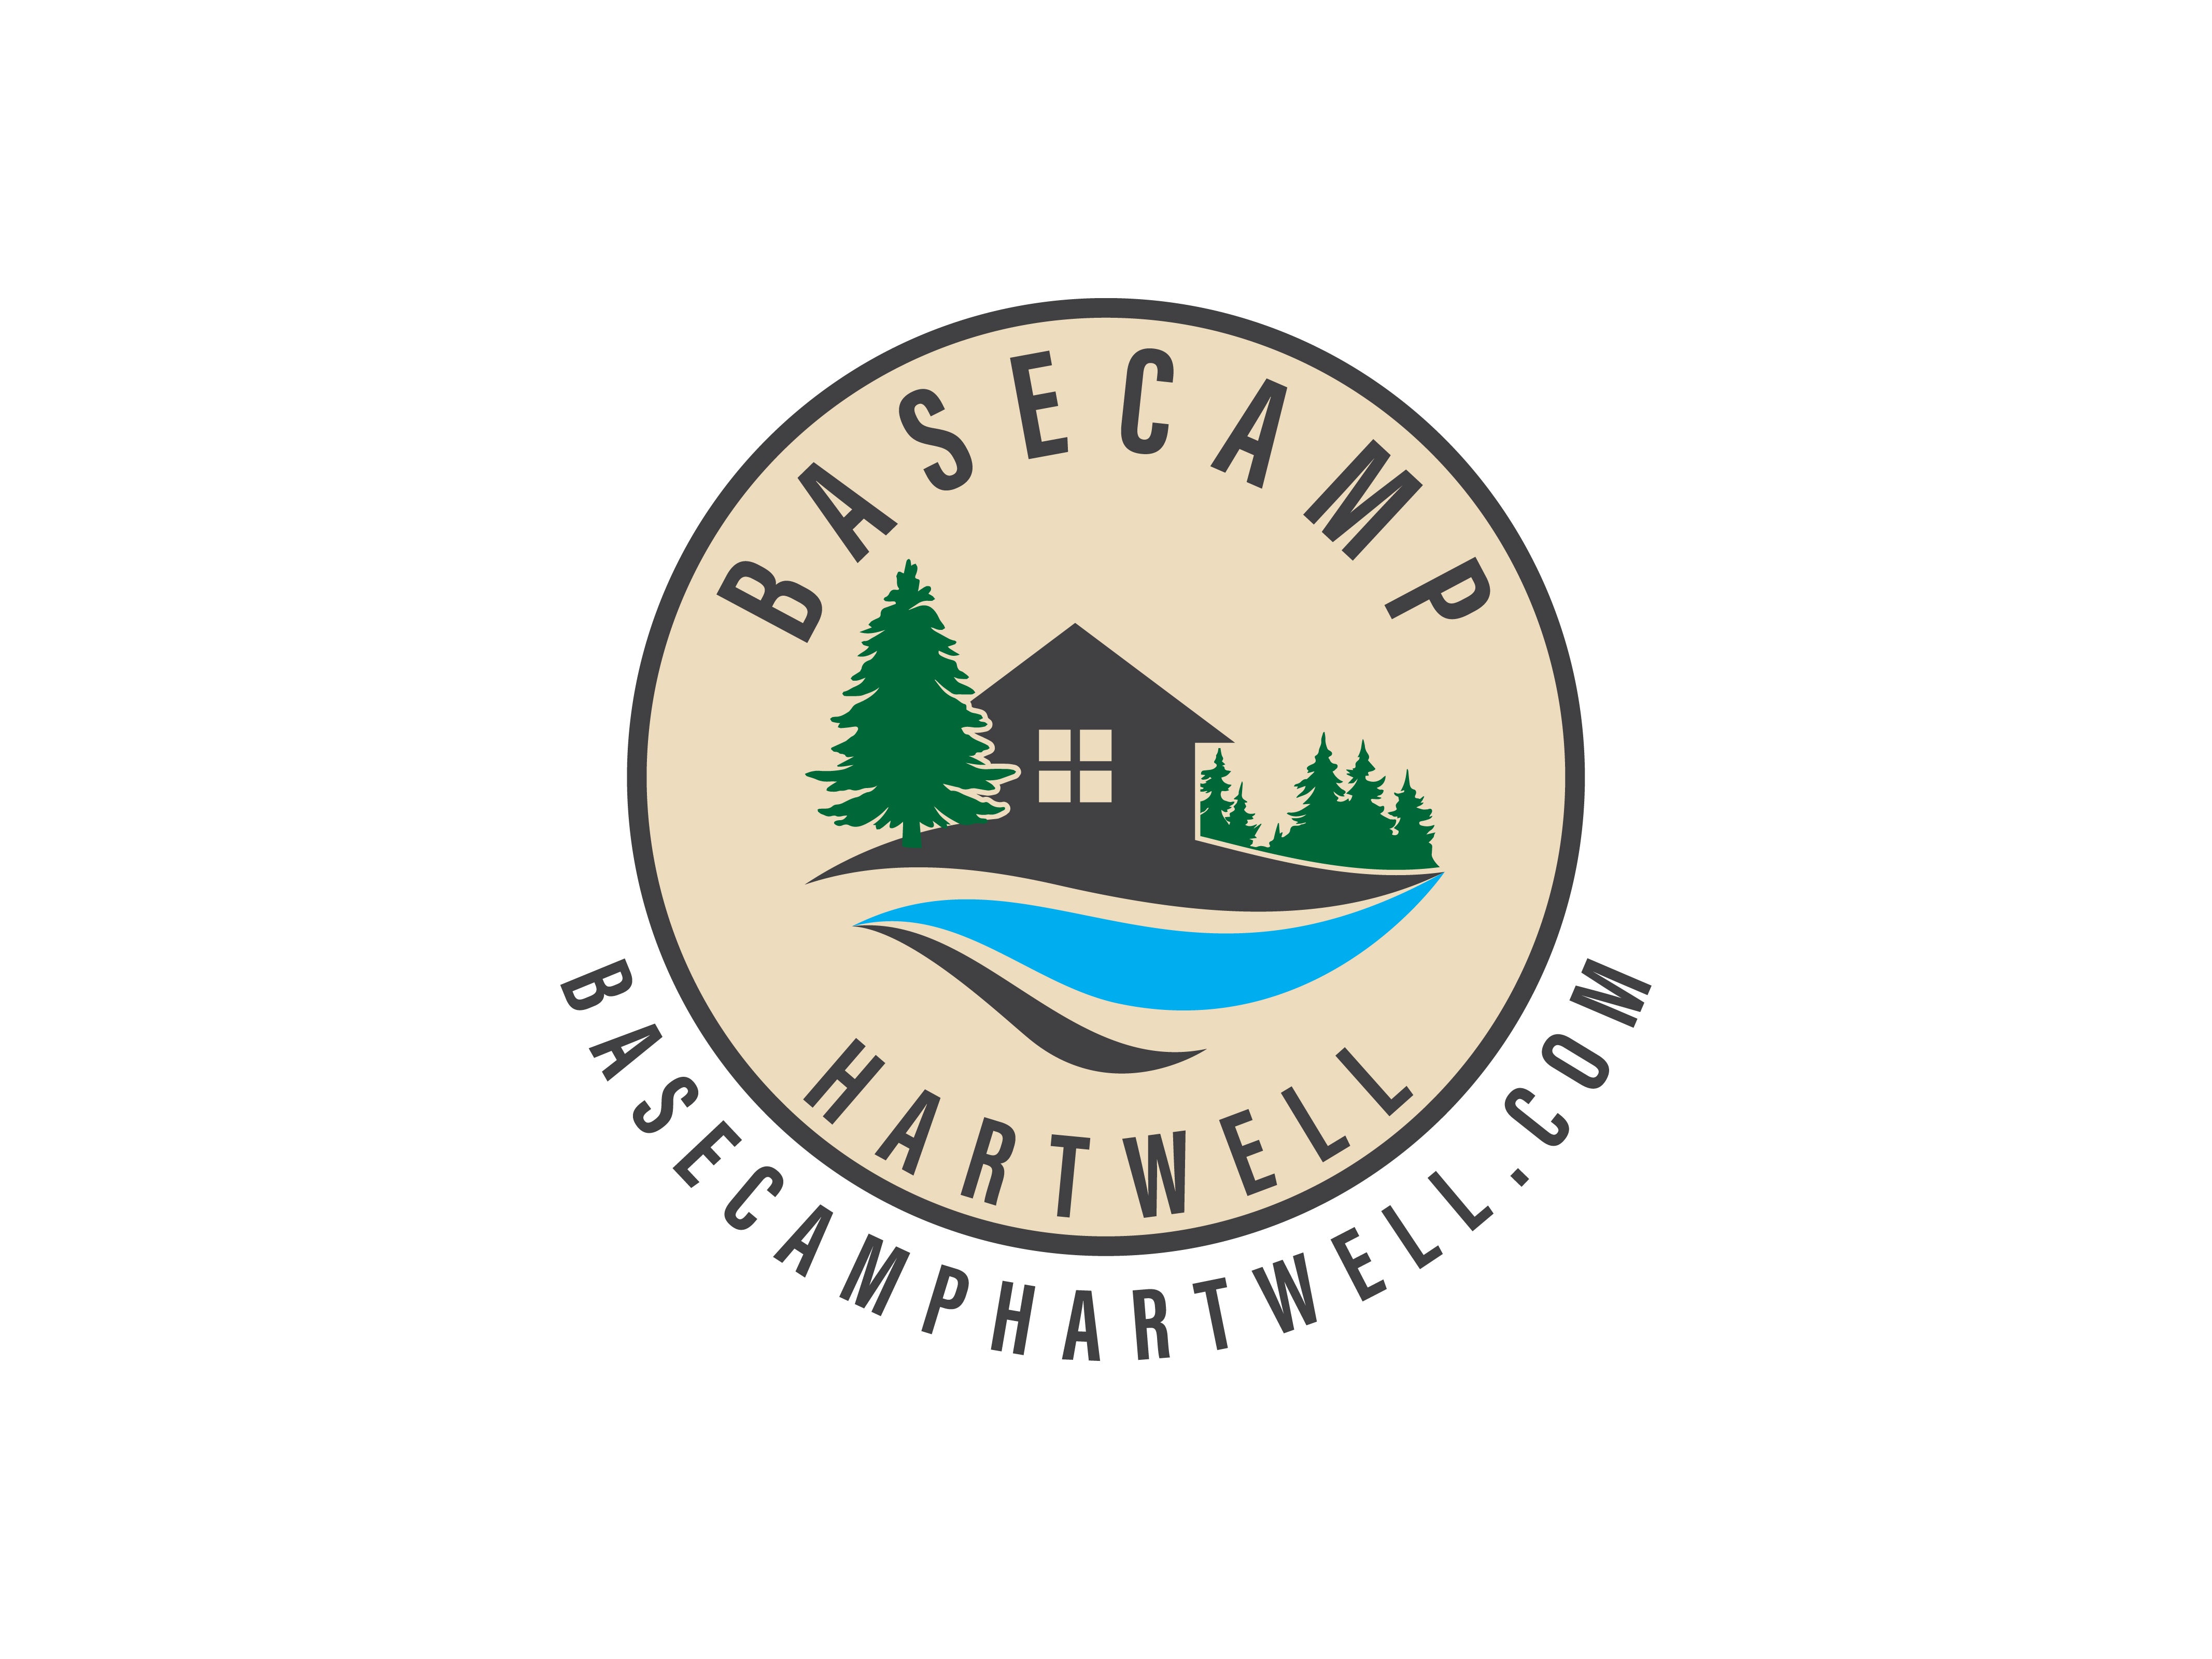 Camper submitted image from Basecamp Hartwell - 1